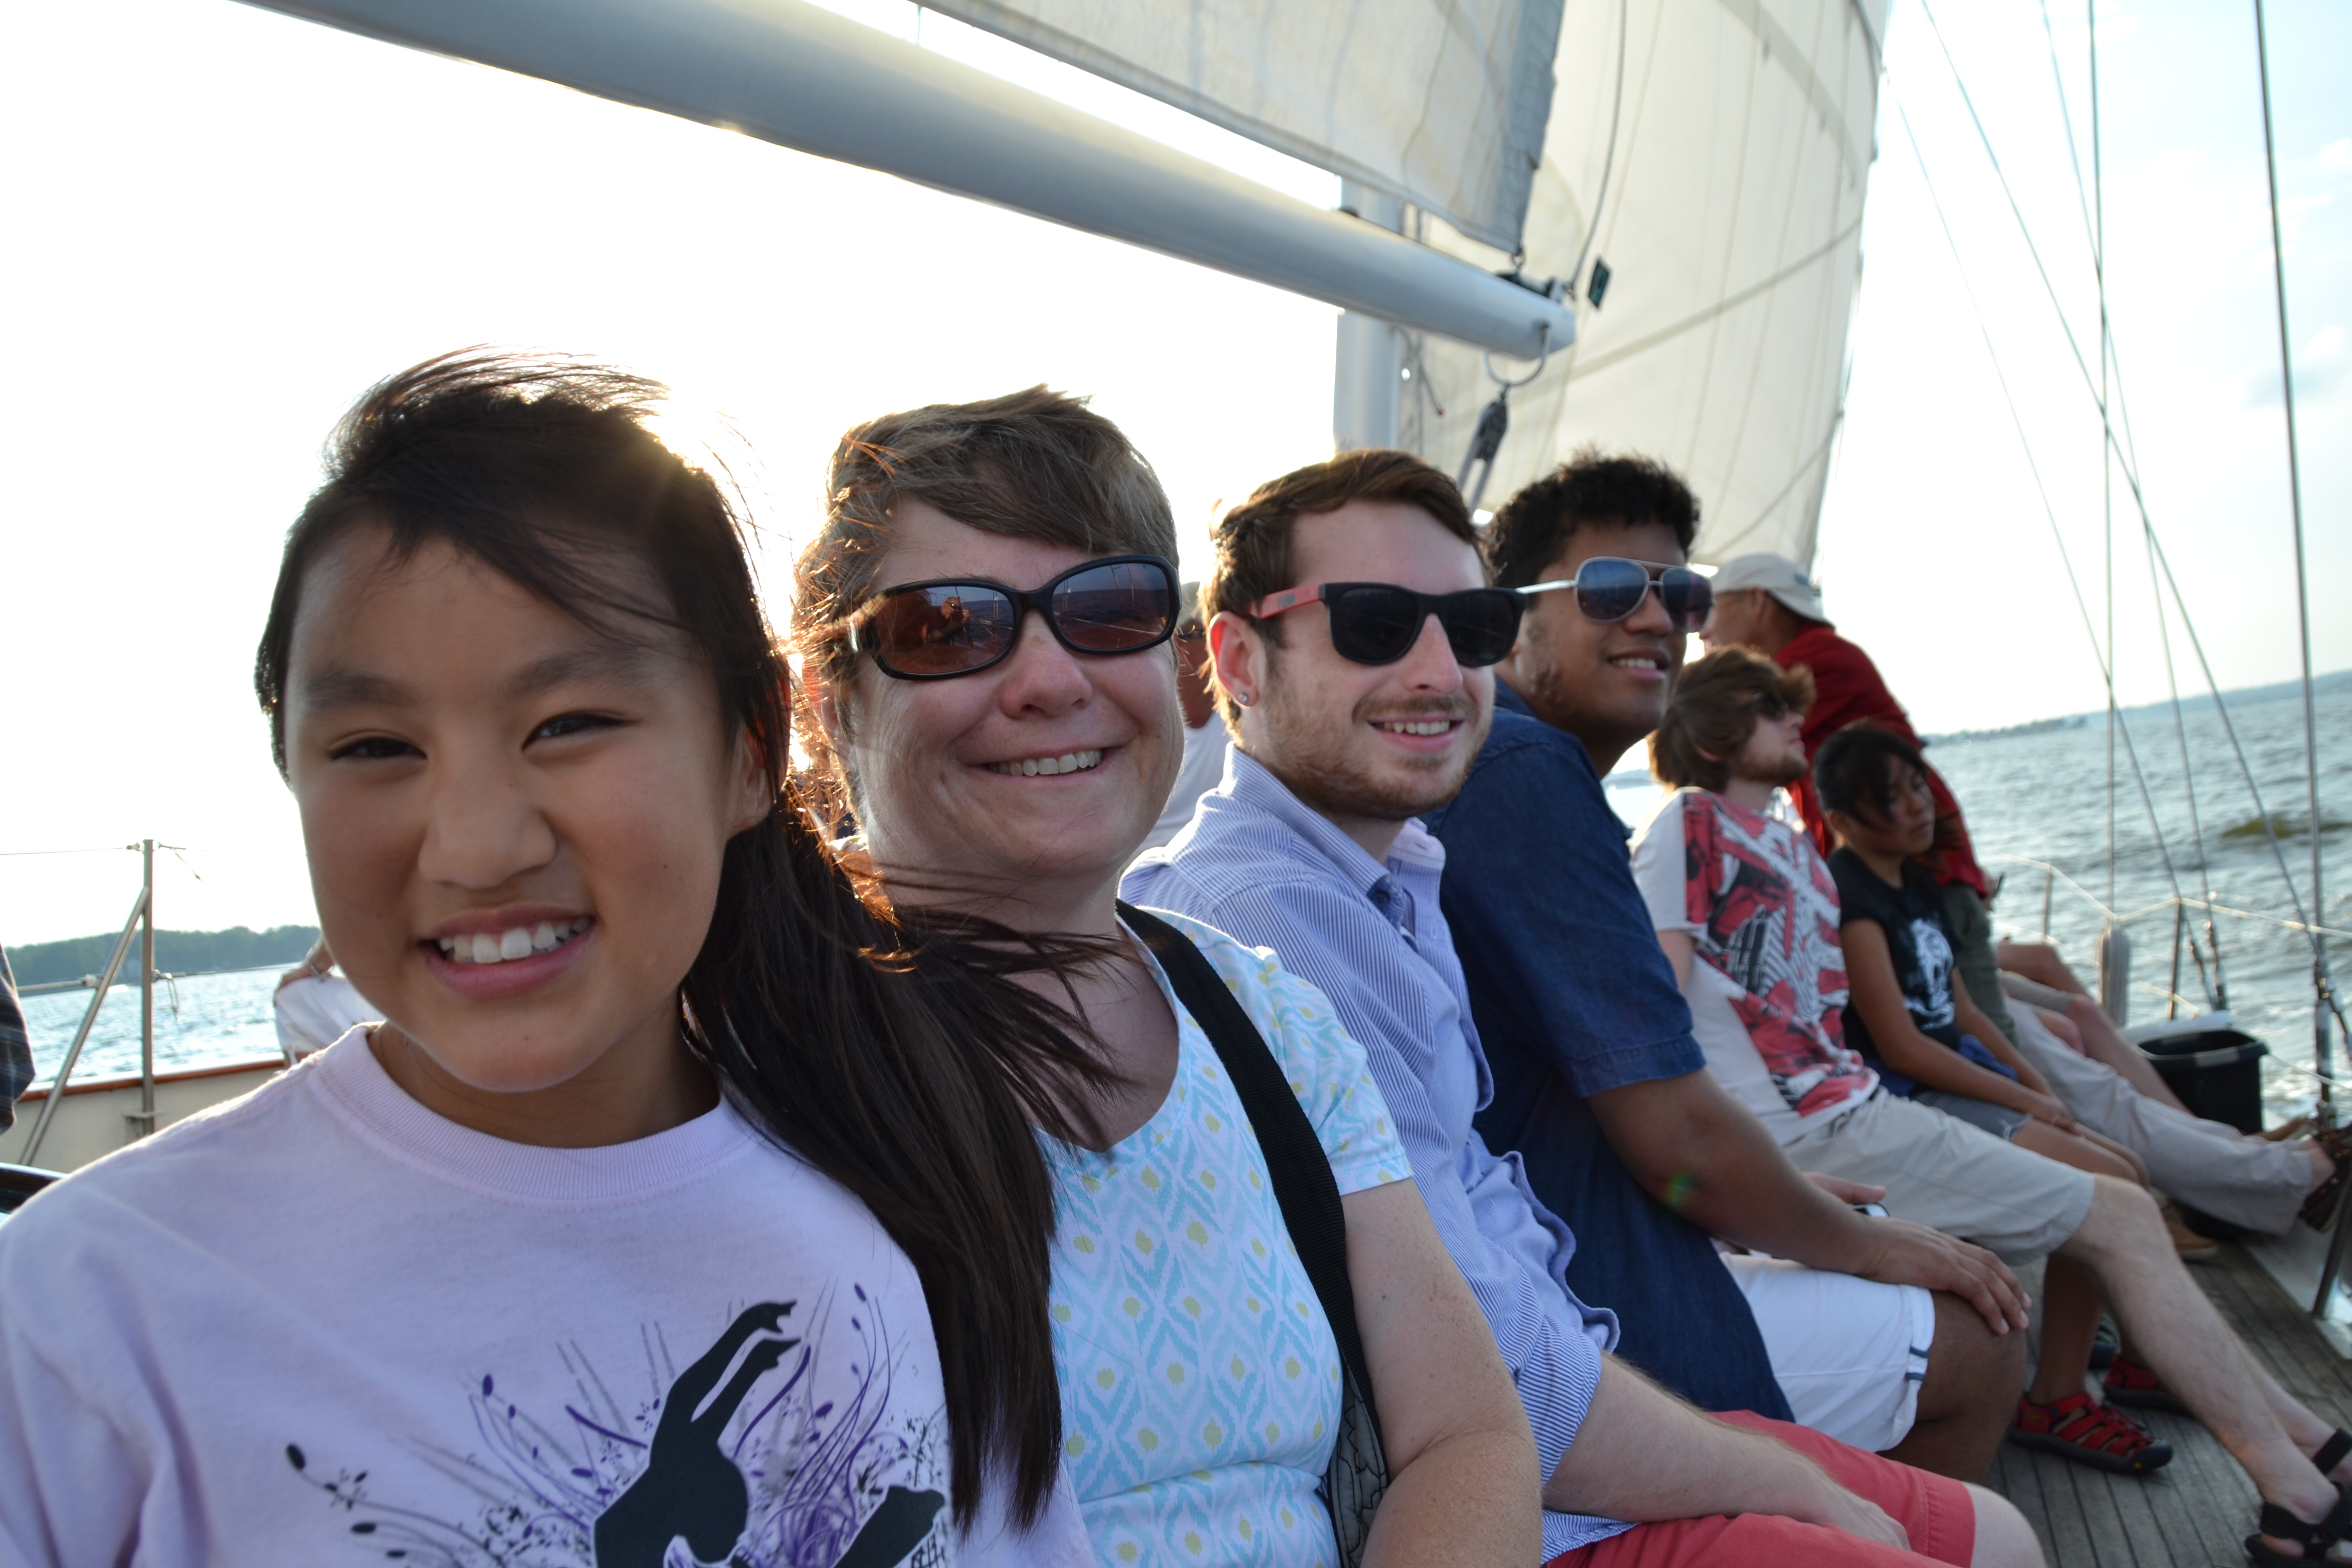 Guests all smiling on a sail on the Chesapeake Bay